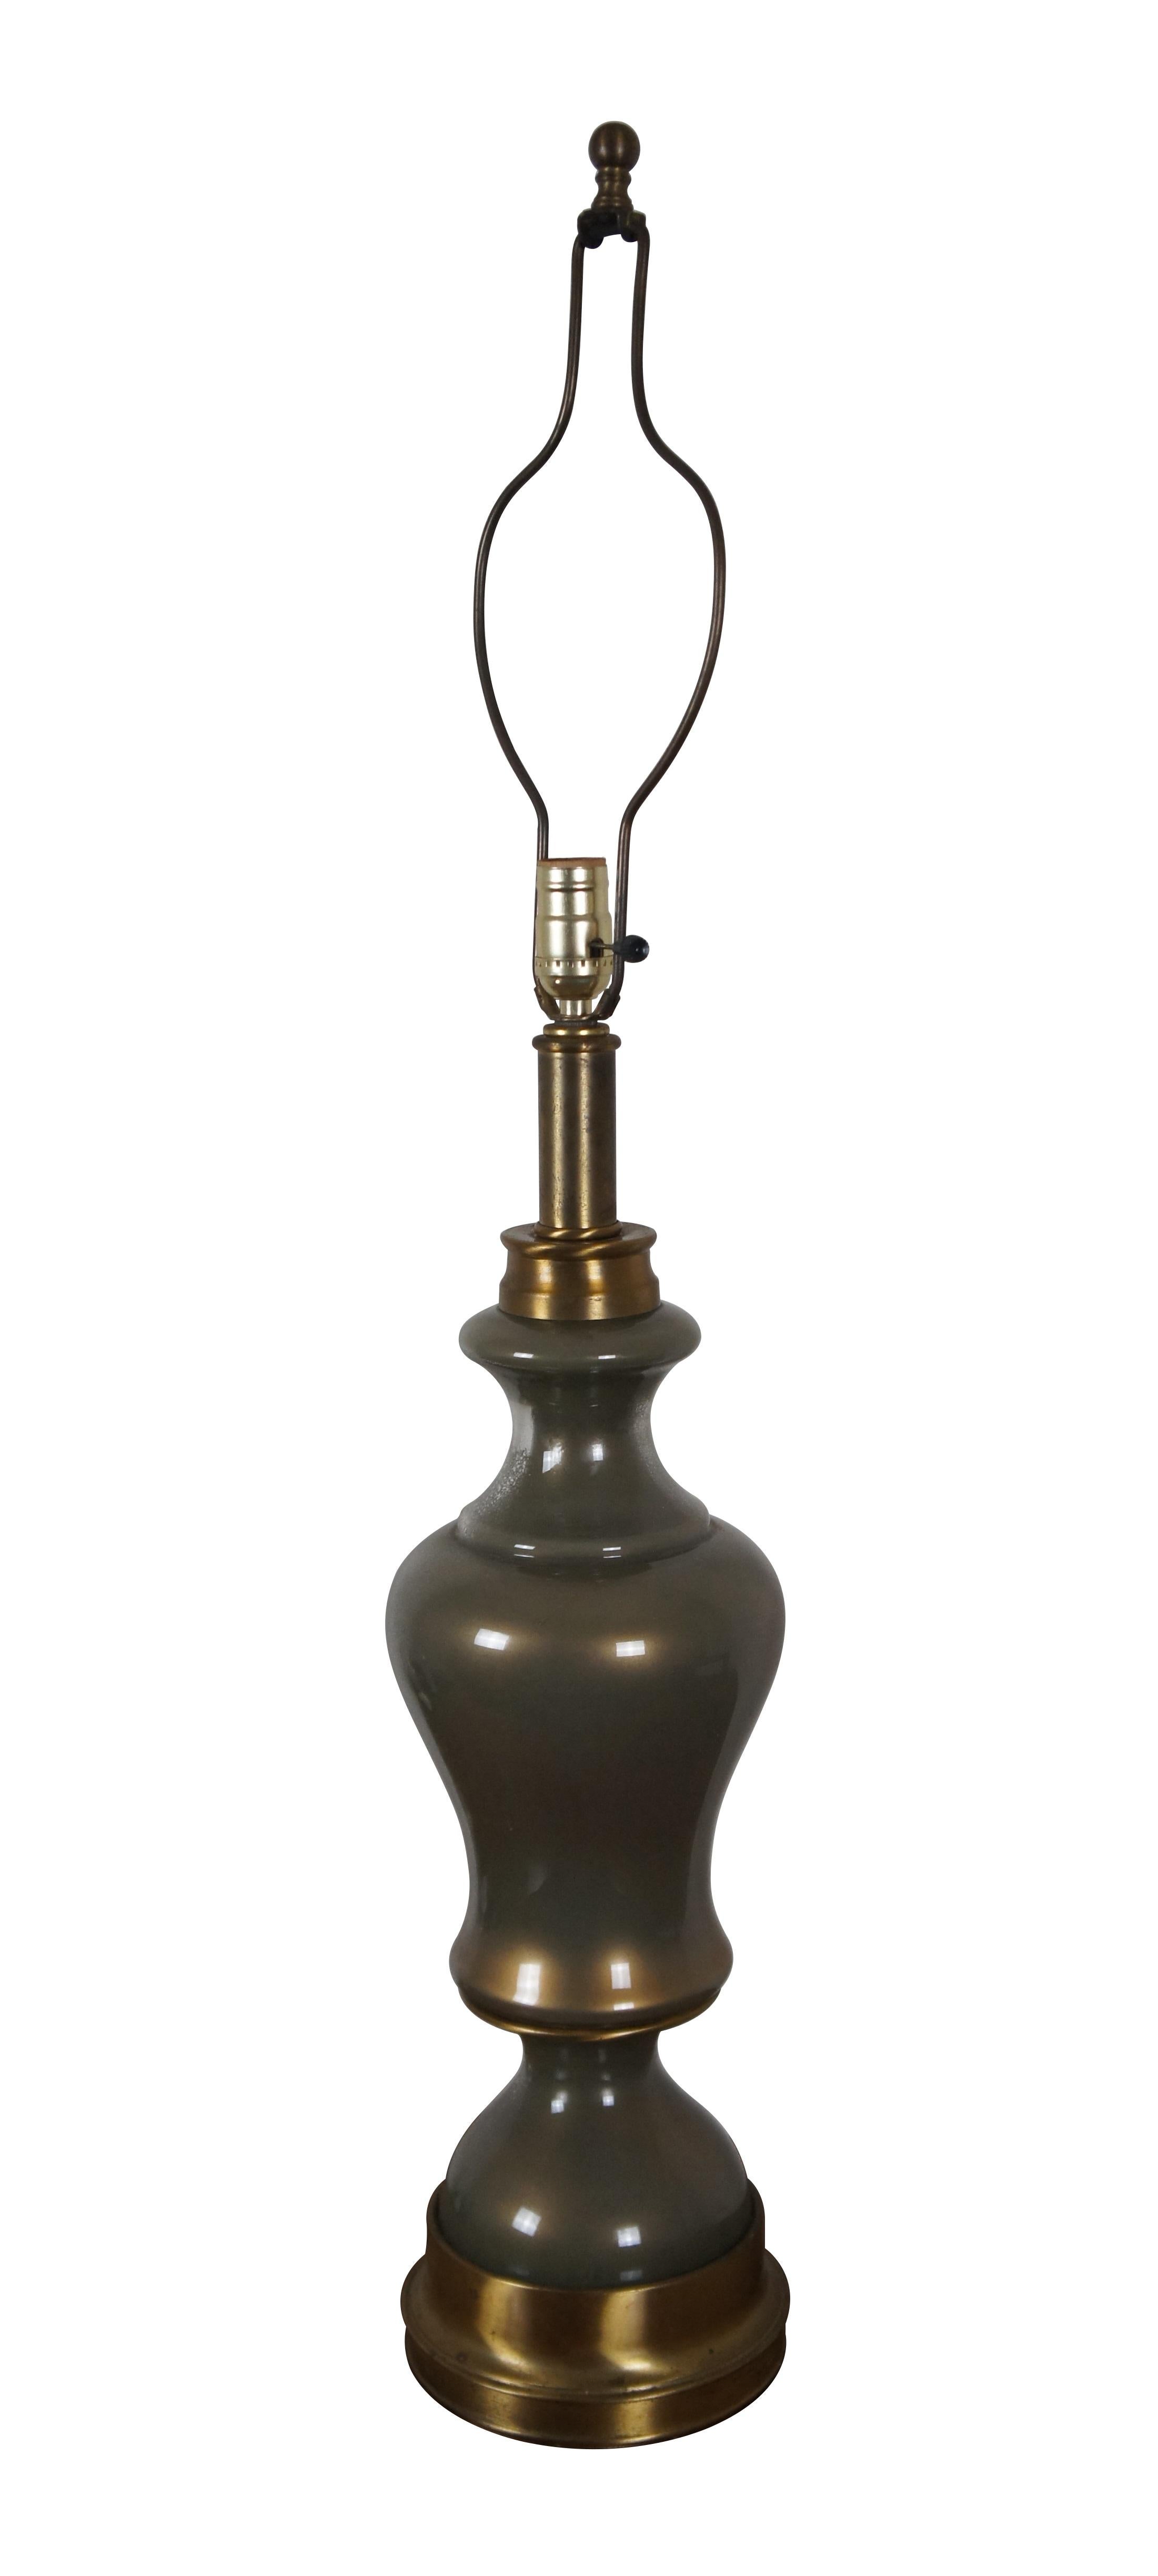 Vintage Hollywood Regency style glass and brass table lamp featuring round serpentine form.

Dimensions:
7.25